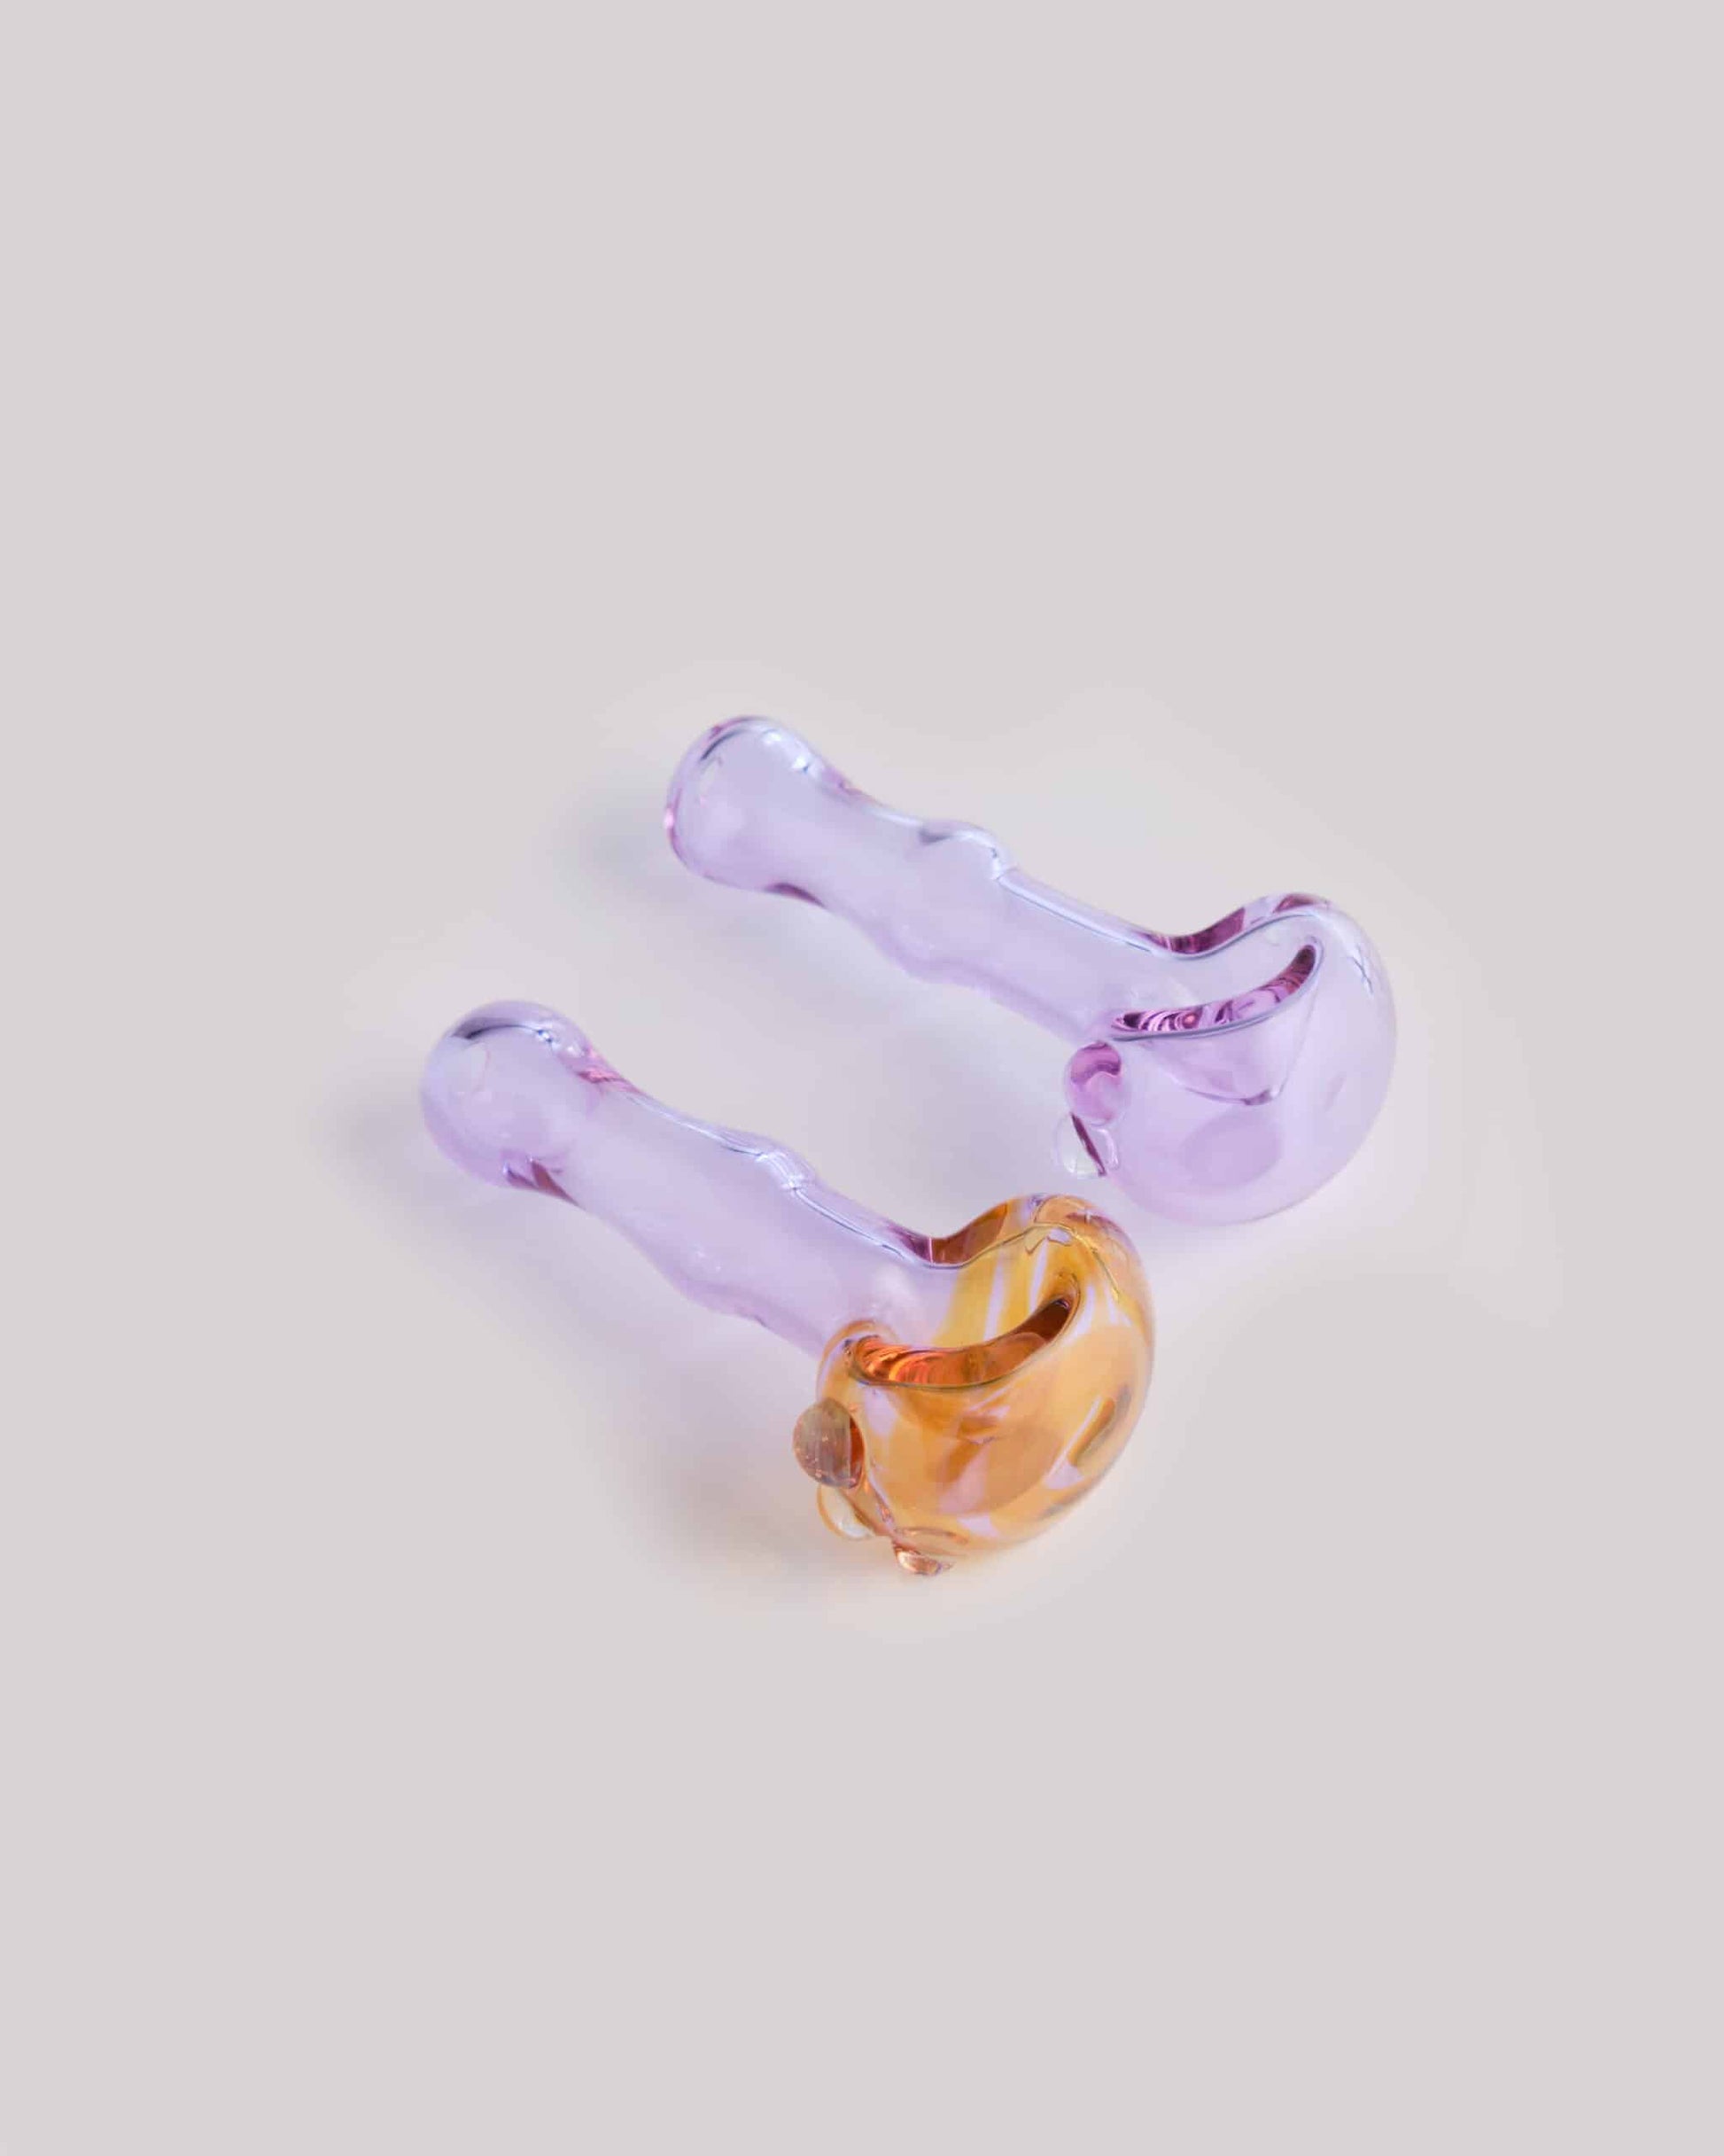 meticulously crafted design of the Pink Spoon Pipe by Willy That Glass Guy